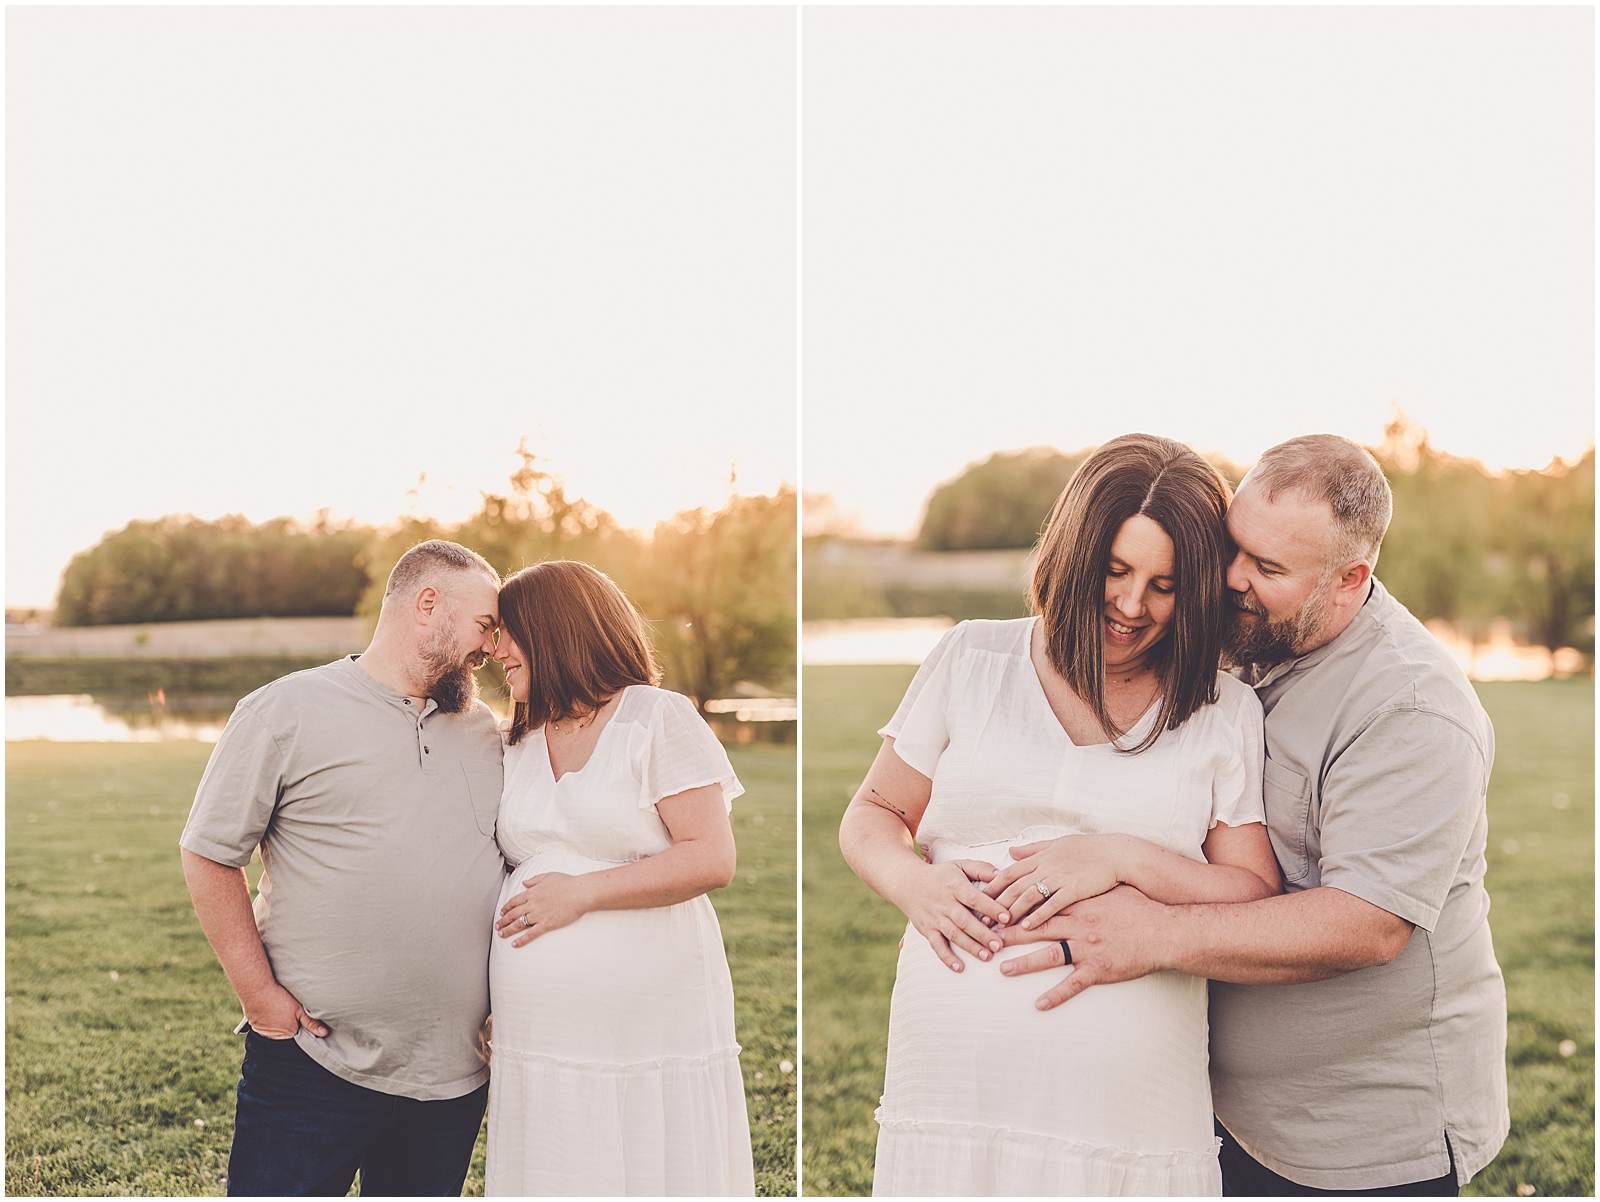 Spring maternity photos in Central Illinois with Chicagoland family photographer Kara Evans Photographer.